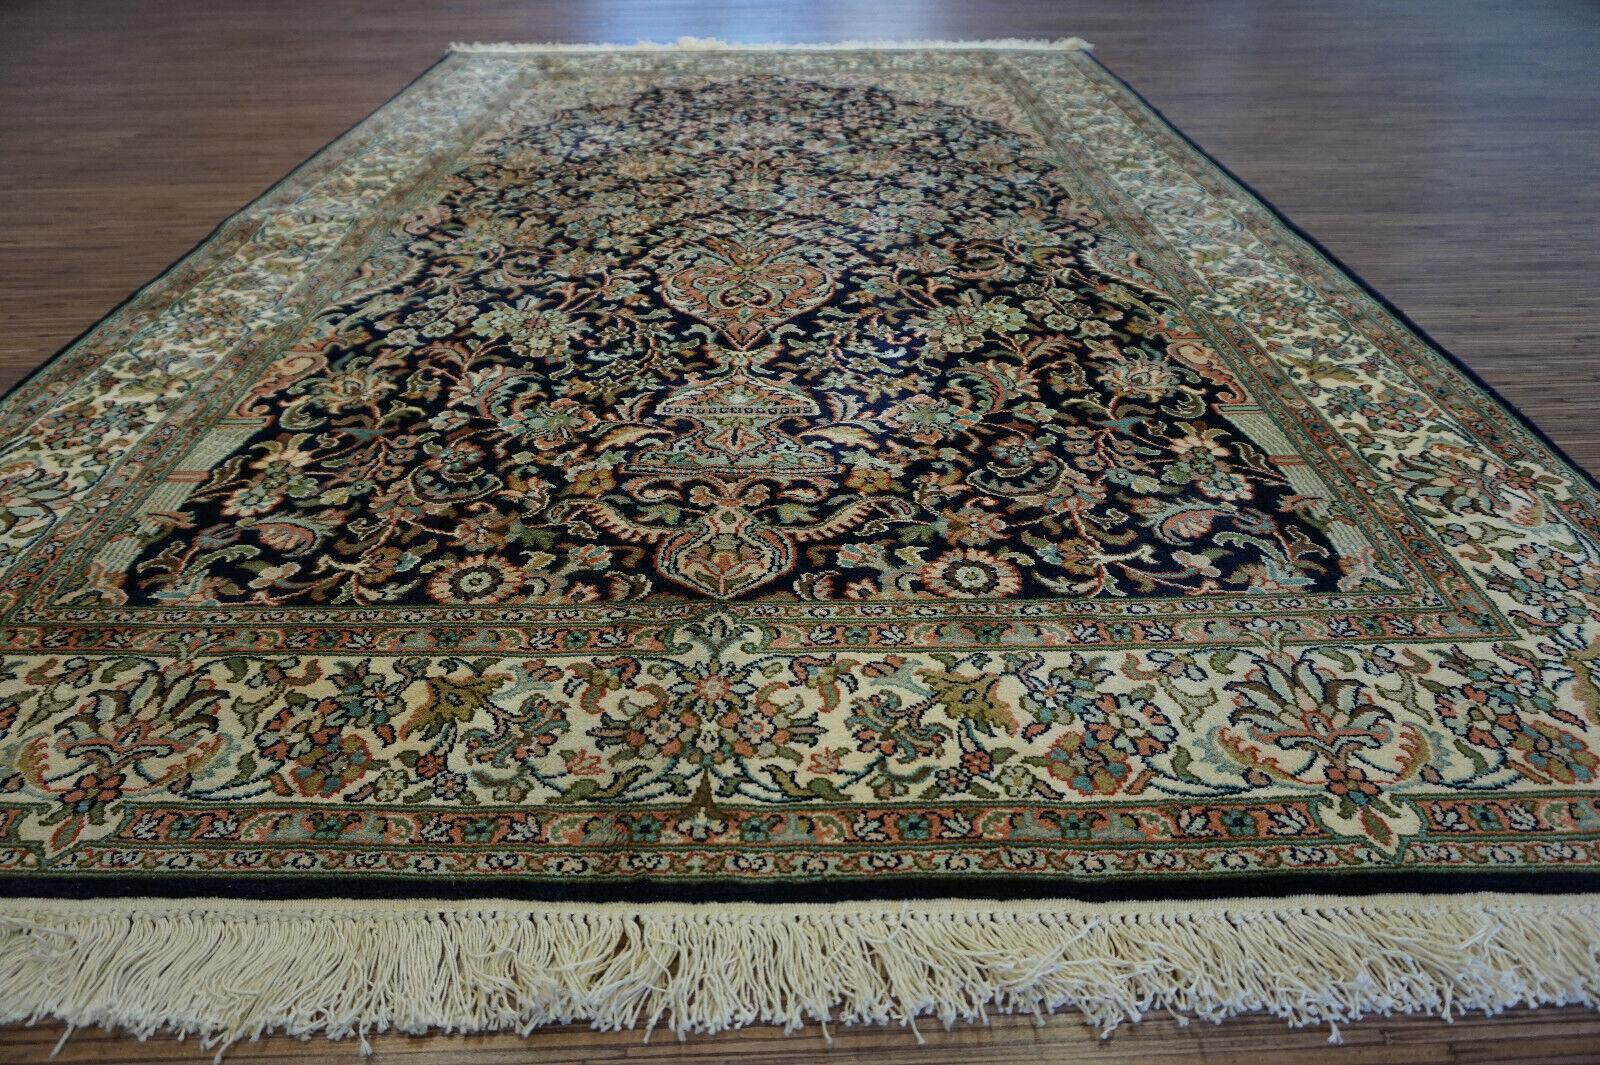 Handmade Vintage Persian Kashmir Tree of Life Rug 4.1' x 6.2', 1970s - 1D58 In Good Condition For Sale In Bordeaux, FR